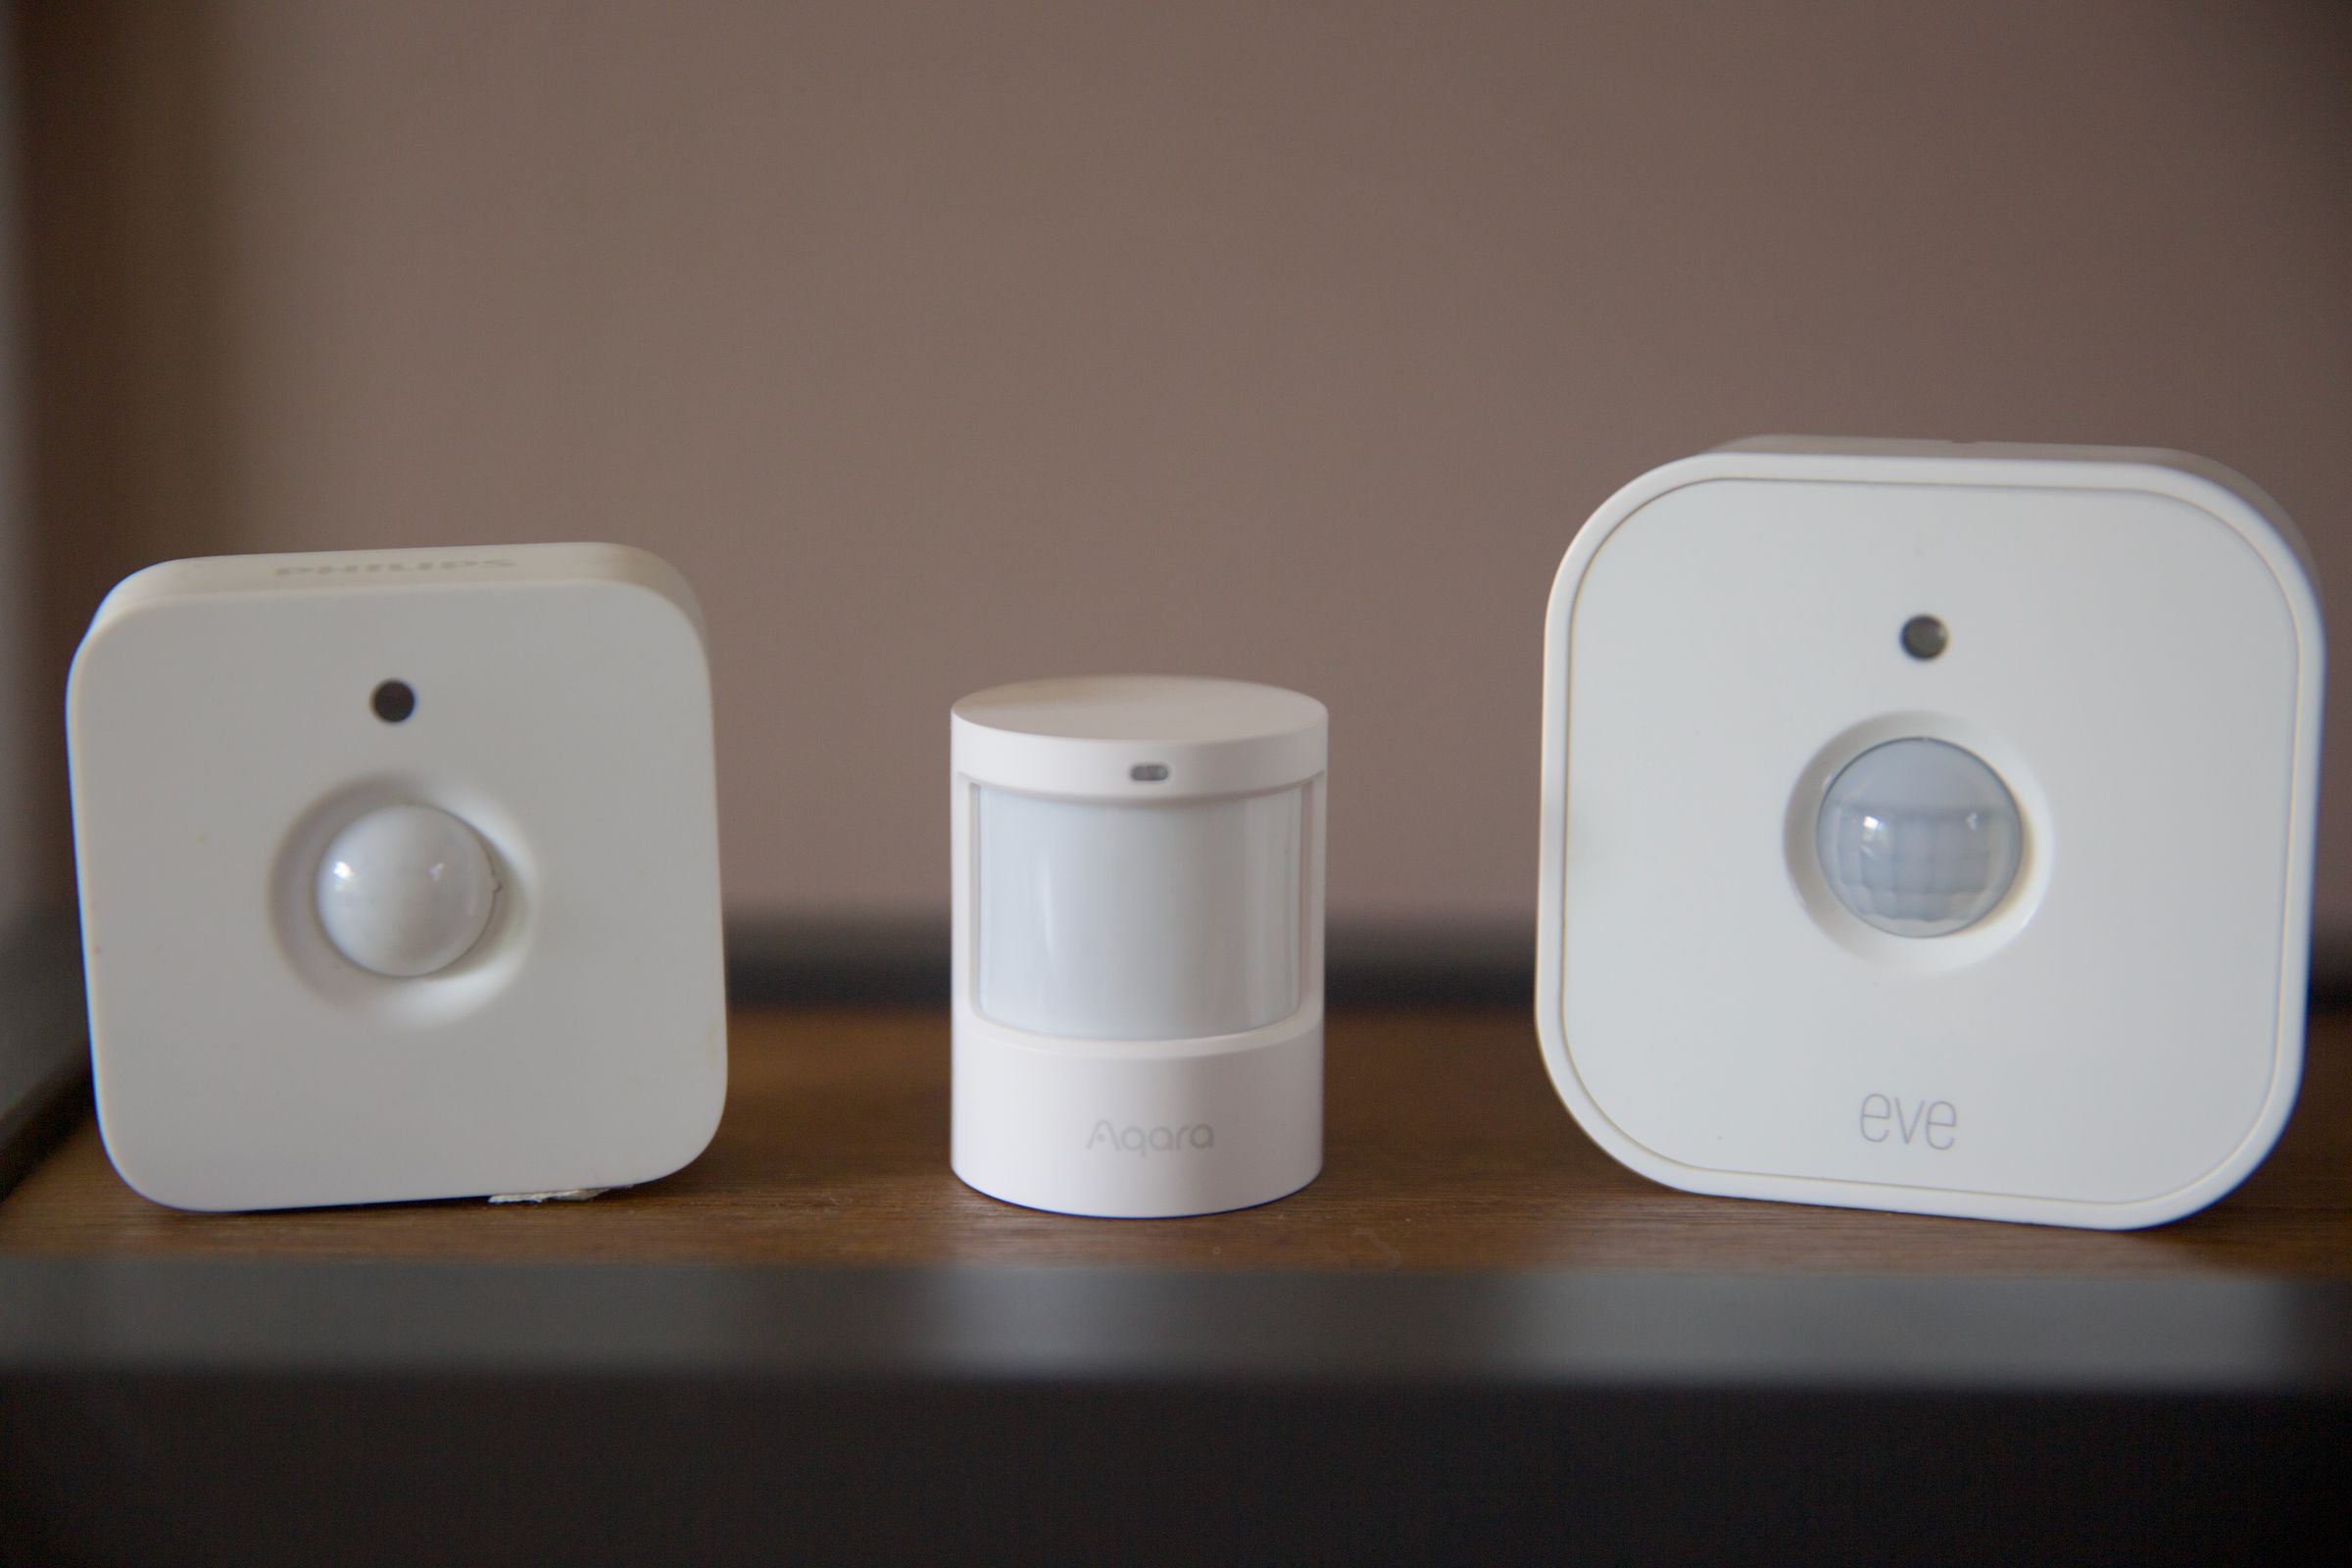 The P2 next to the Philips Hue Motion sensor (left) and Eve Motion (right). Its compact size makes it easier to fit in tight spaces, like under furniture.